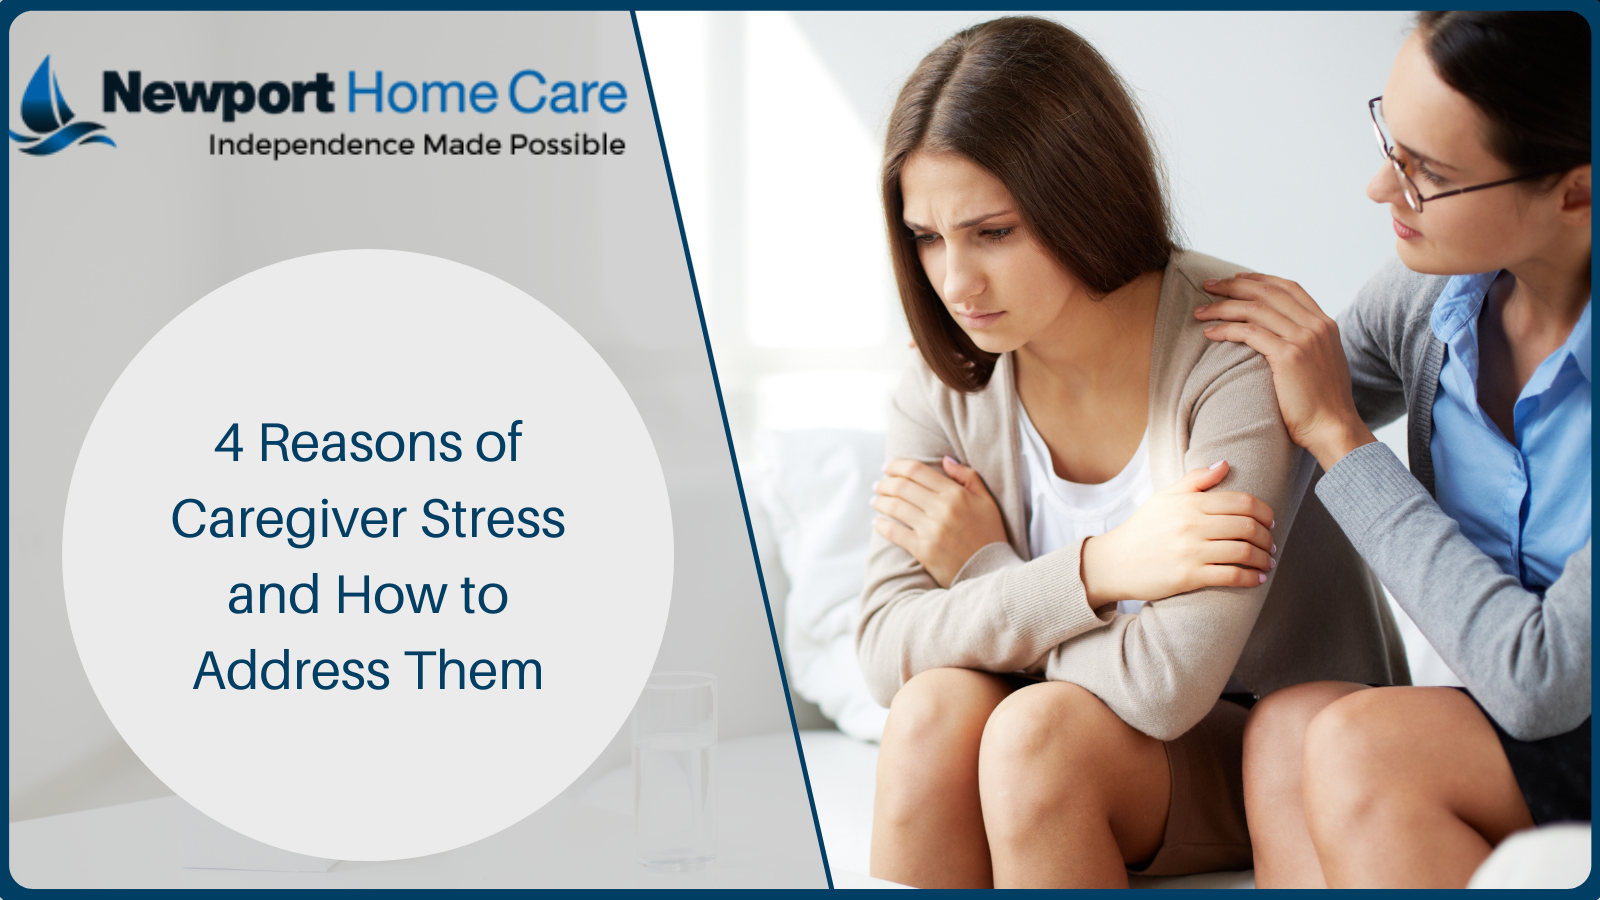 4 Reasons of Caregiver Stress and How to Address Them